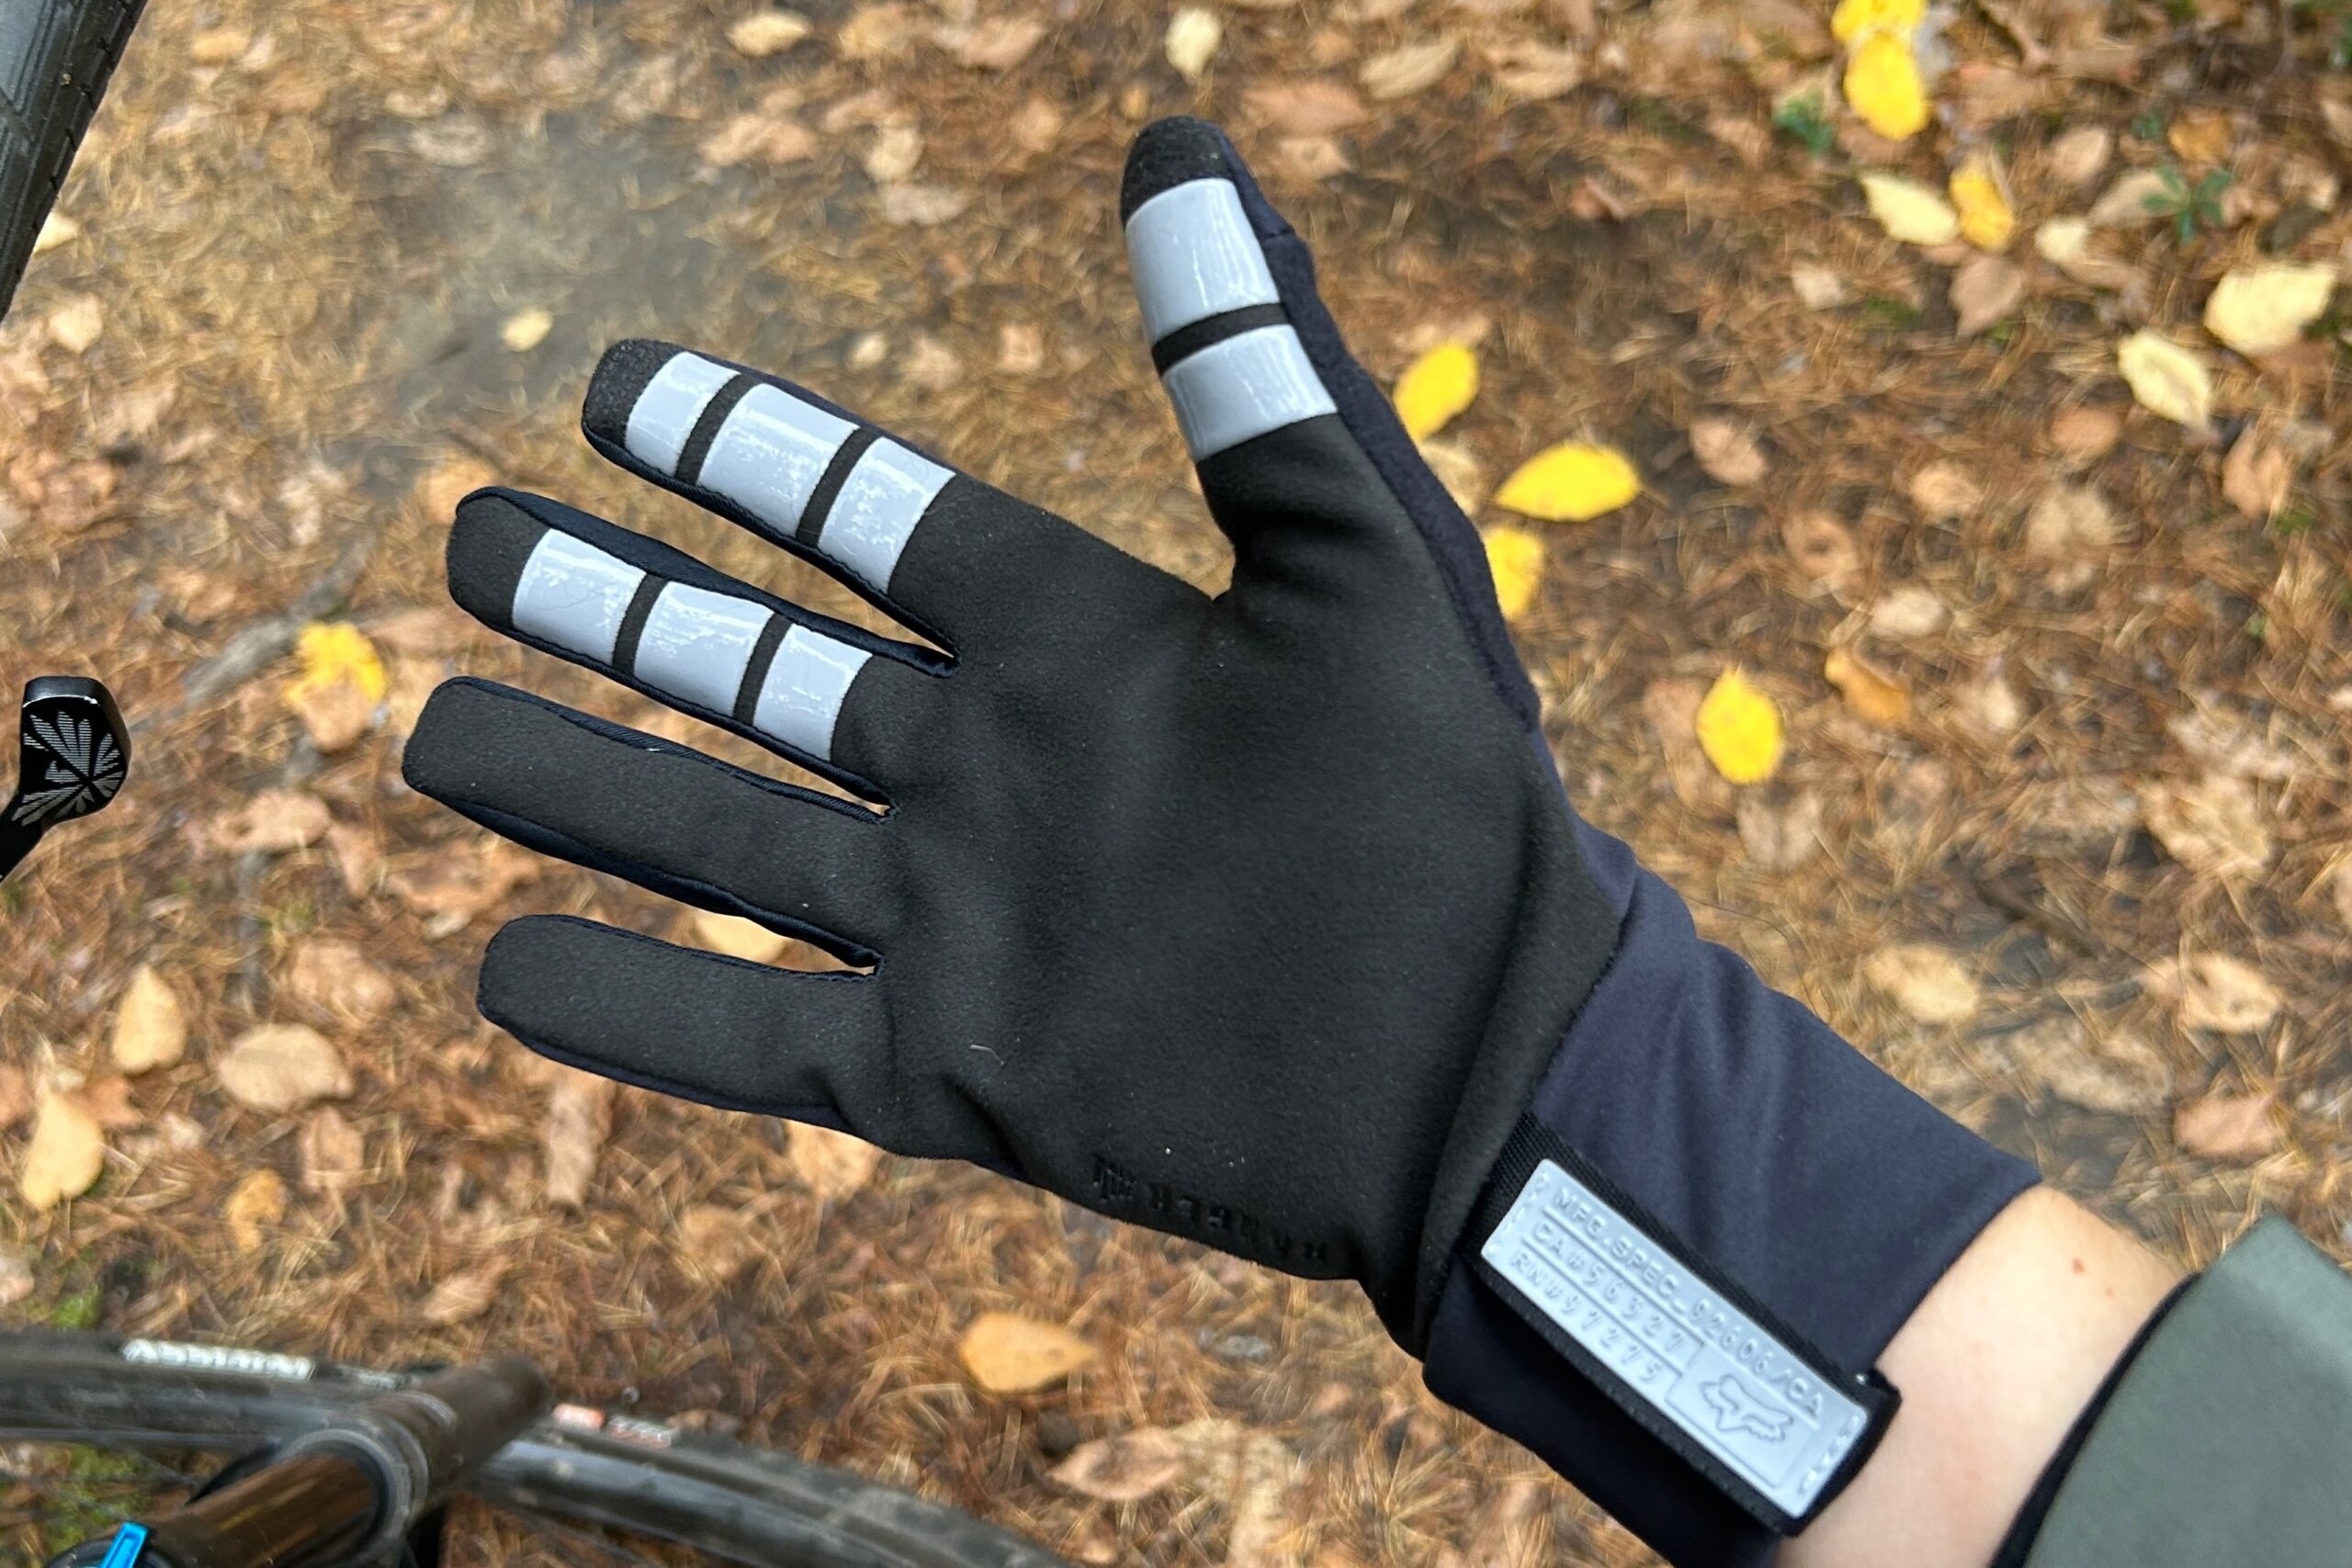 Close up shot of the AX Suede palm of the Fox Ranger Fire mountain bike gloves